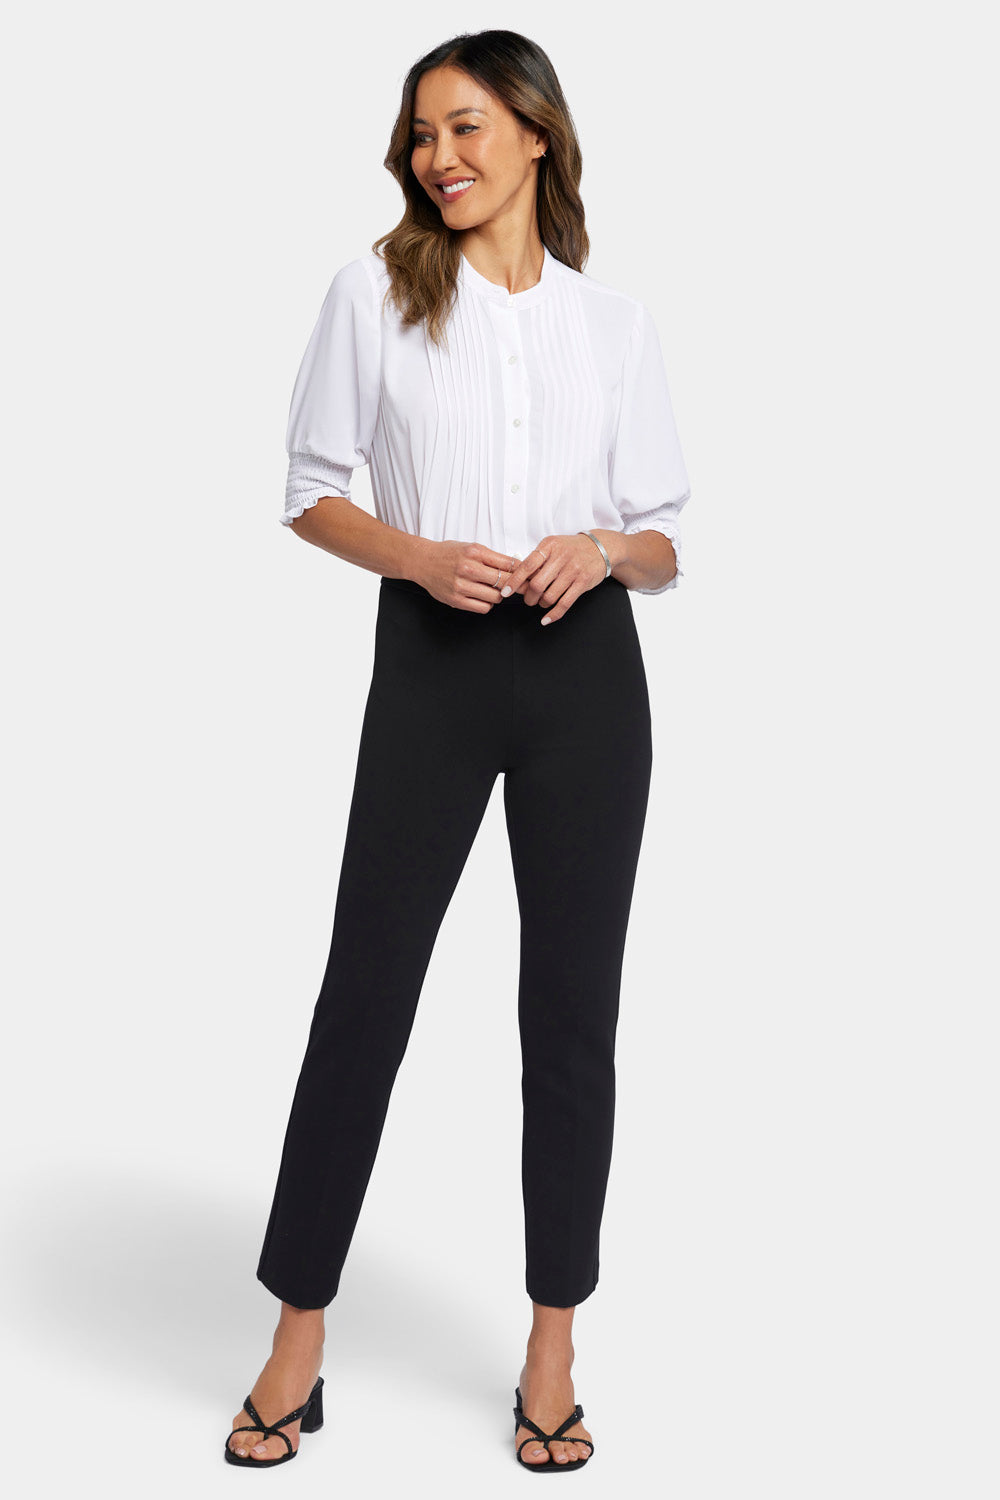 Pull-On Straight Ankle Trouser Pants Sculpt-Her™ Collection - Black Black |  NYDJ